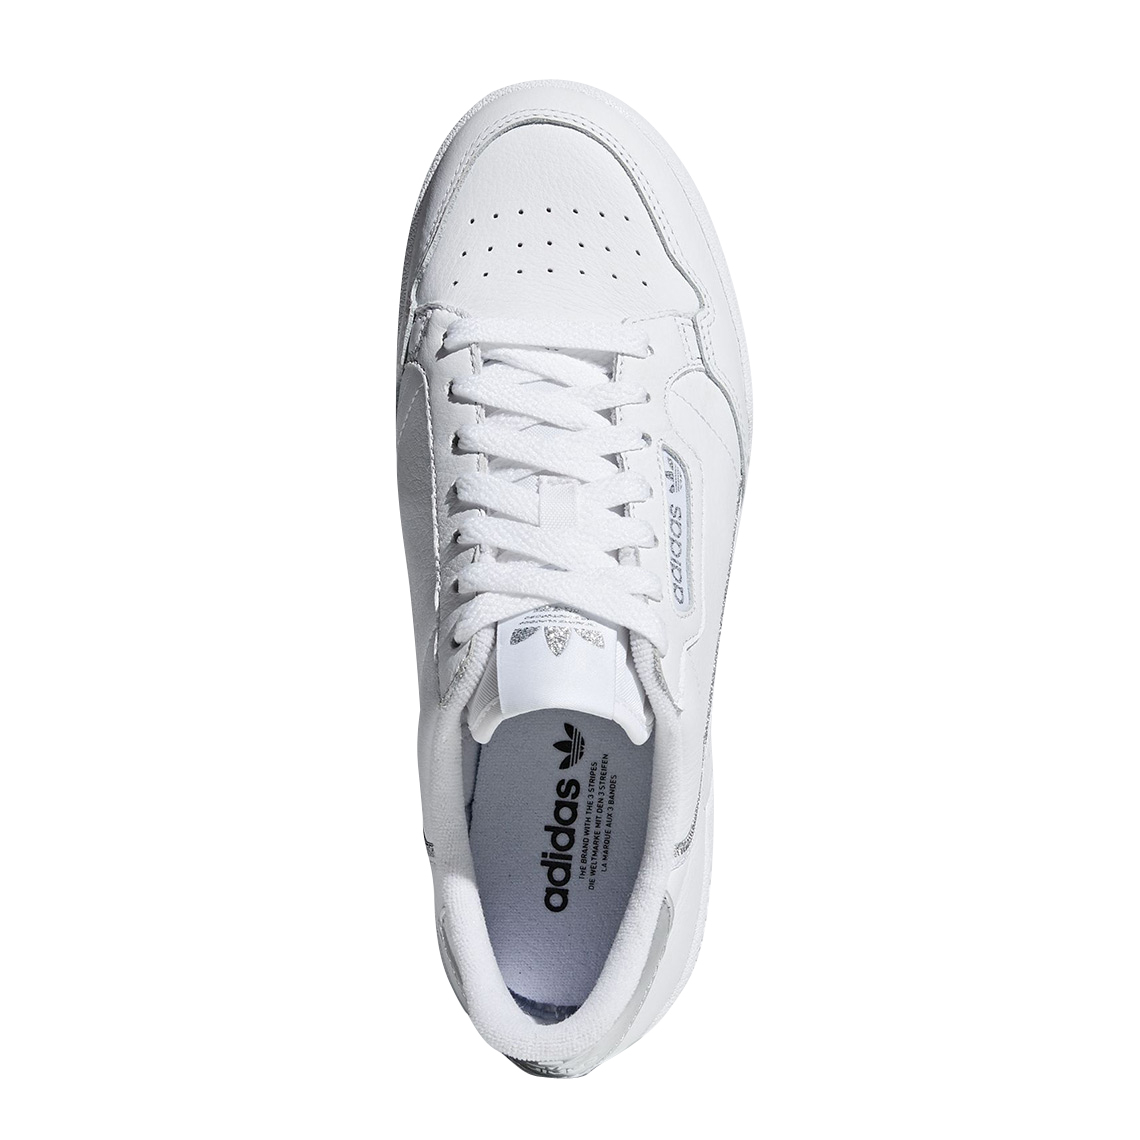 adidas Continental 80 White Silver EE8925